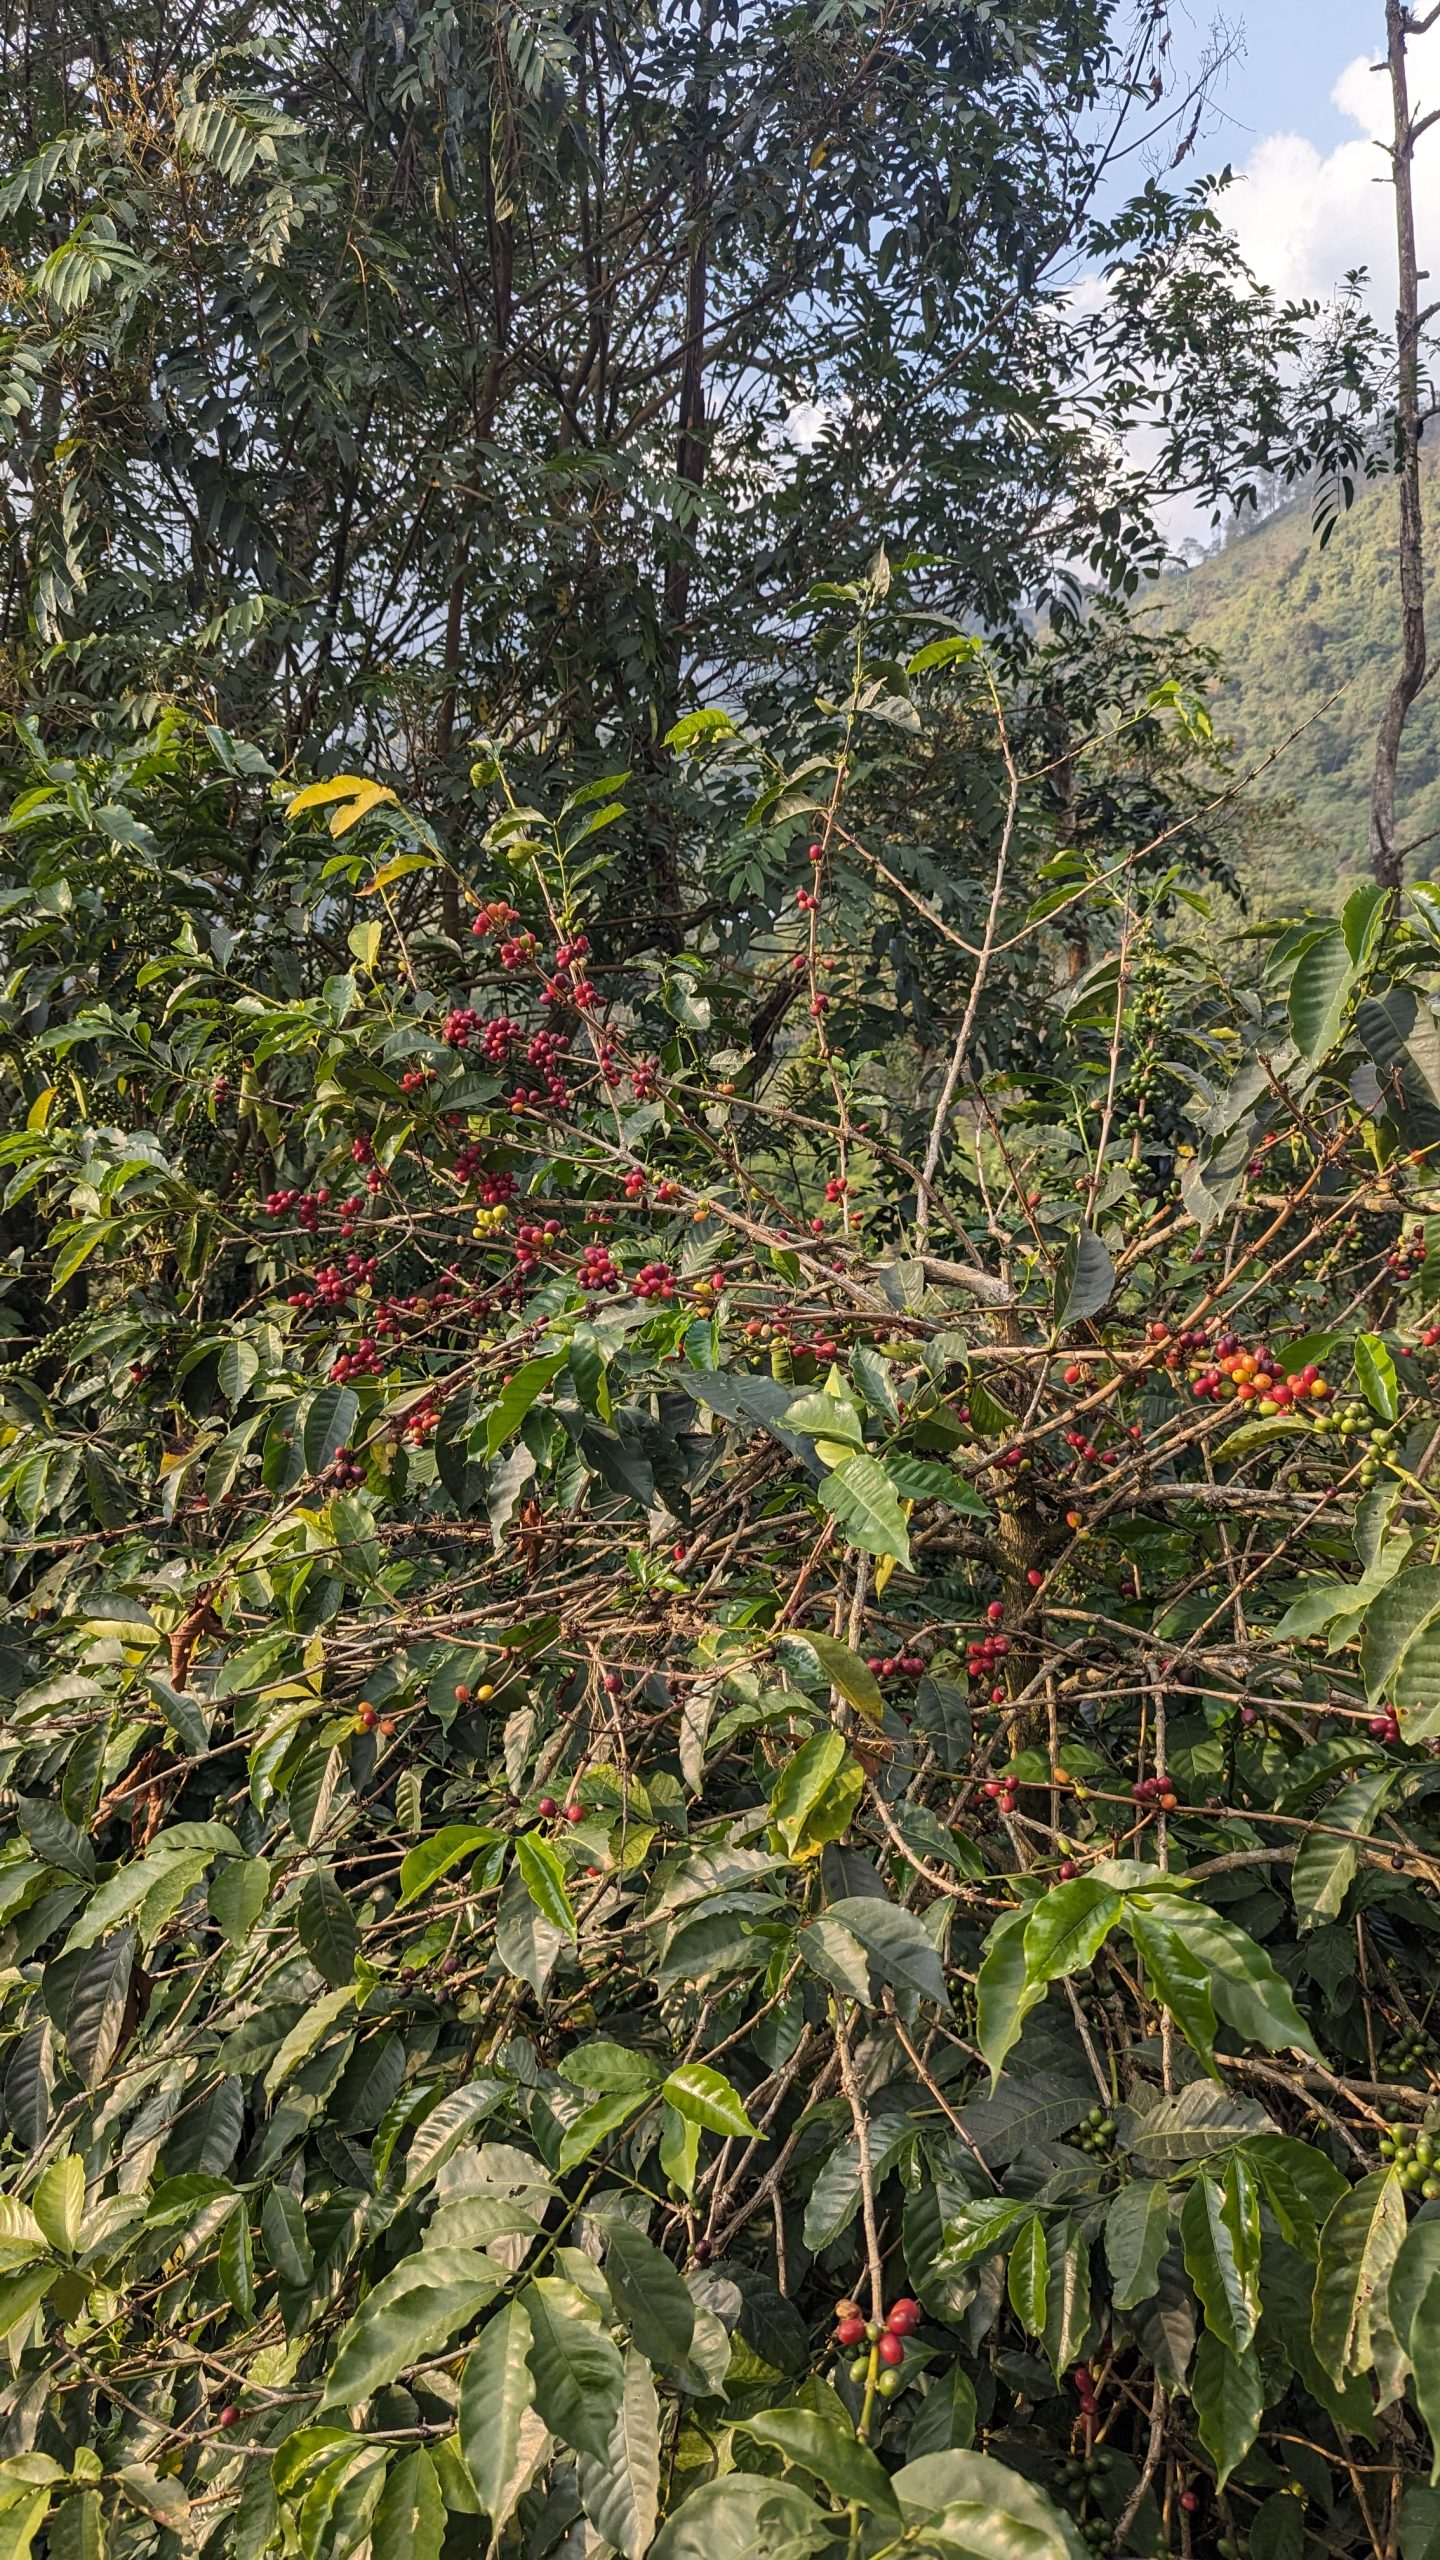 Coffee tree with ripe/almost ripe cherries